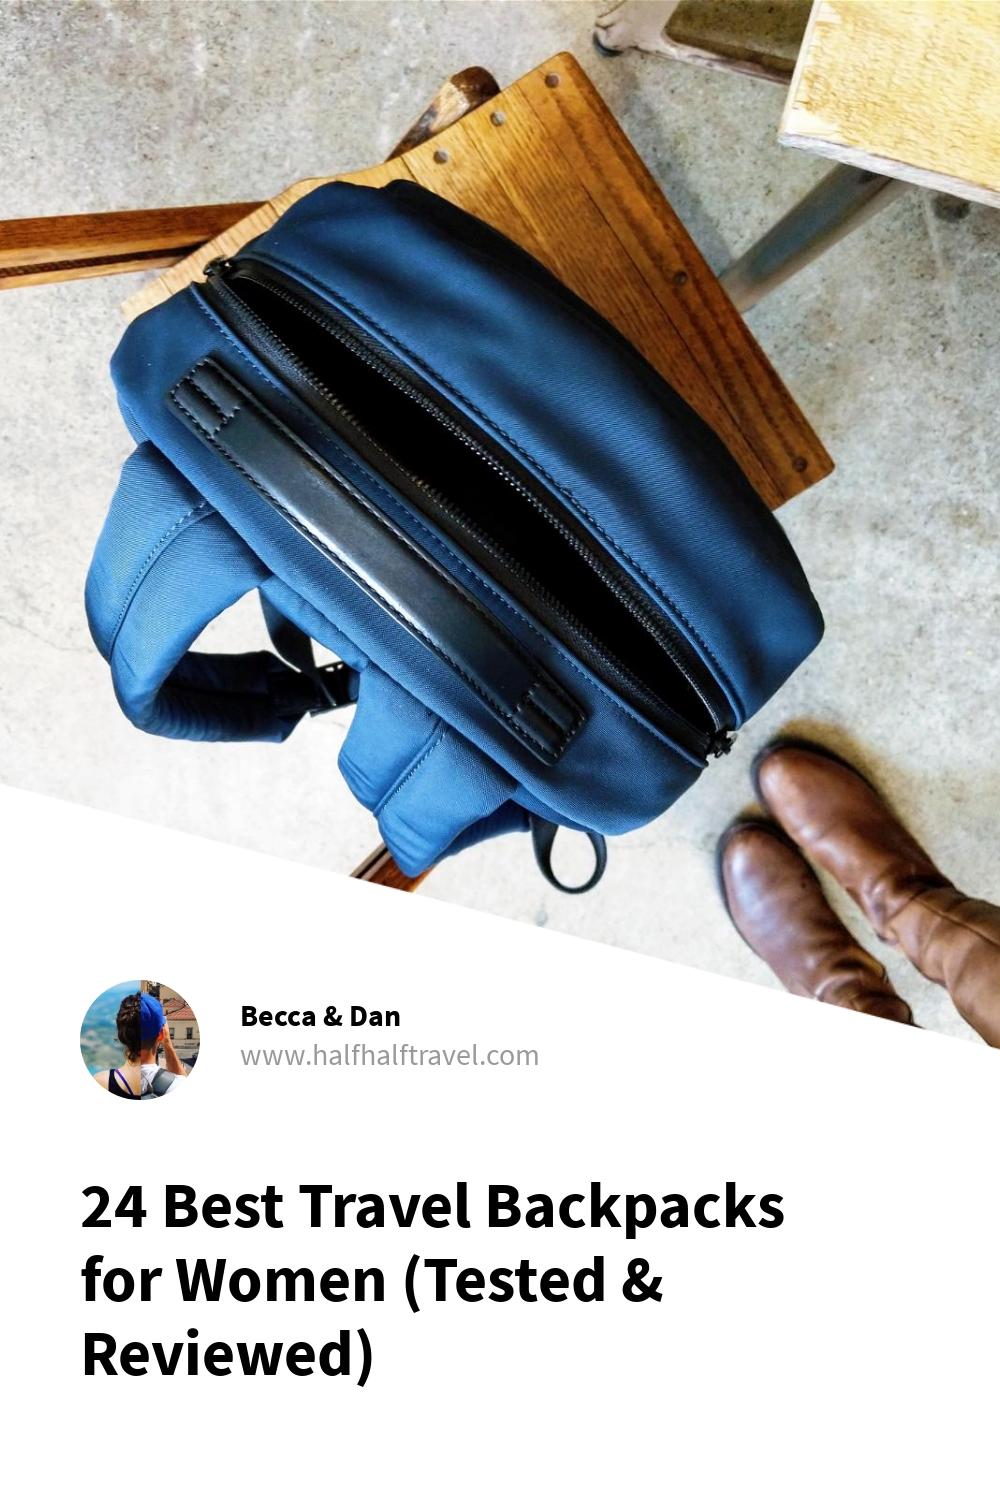 24 Best Travel Backpacks for Women (Tested & Reviewed)